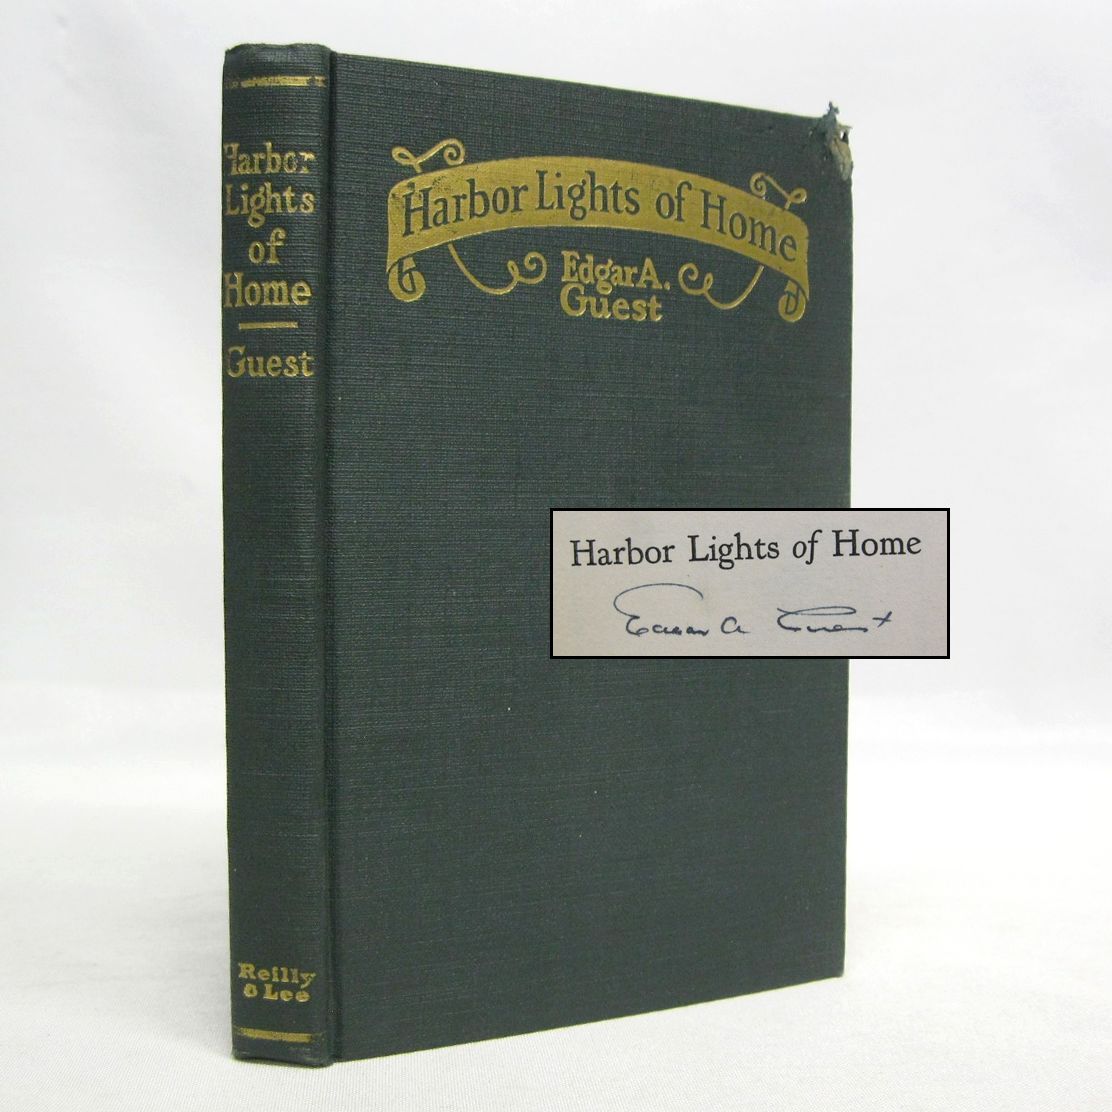 Harbor Lights of Home by Edgar A. Guest